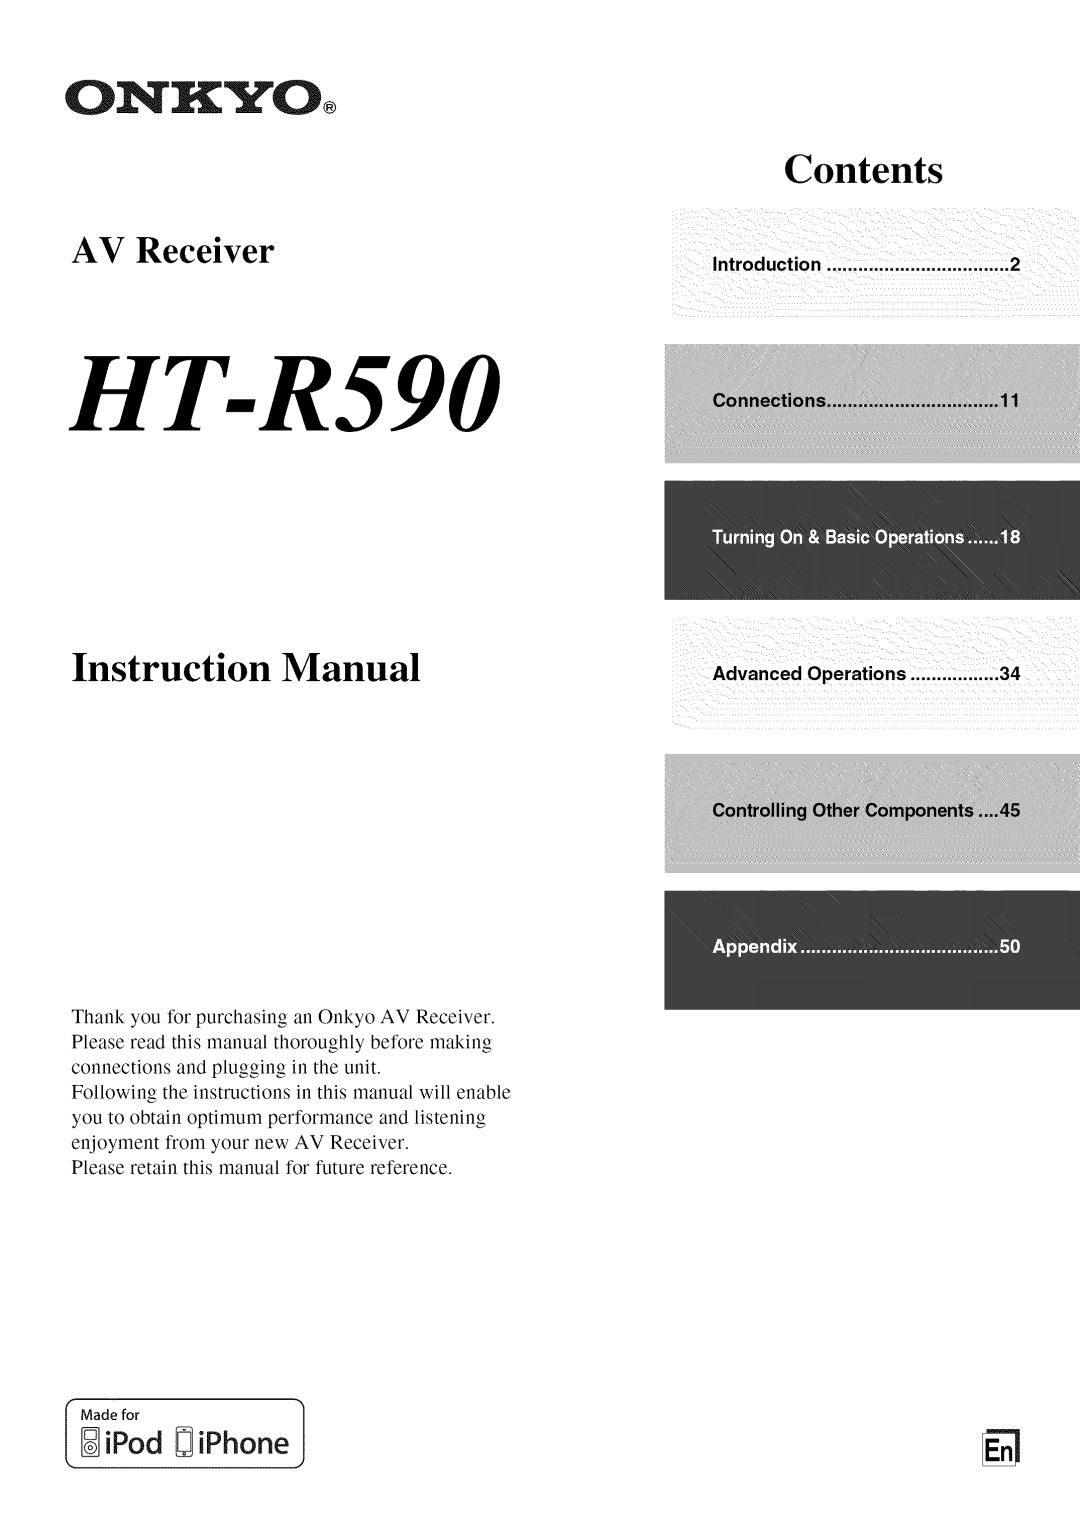 Onkyo HT-R590 instruction manual M iPoddef iPhone, OINKYOo, Contents, AV Receiver, Instruction Manual 